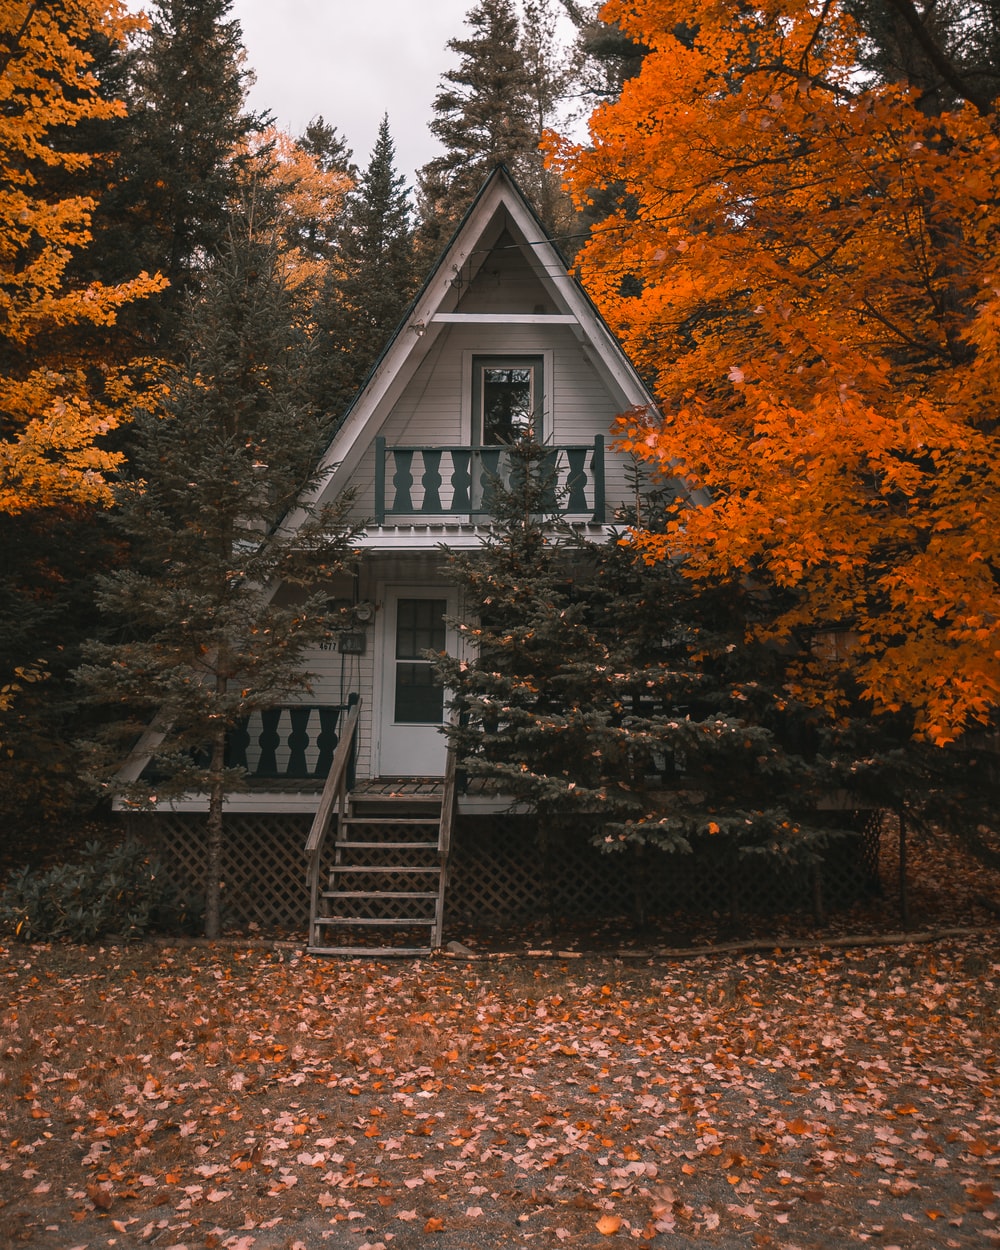 Cozy Cabin Picture. Download Free Image